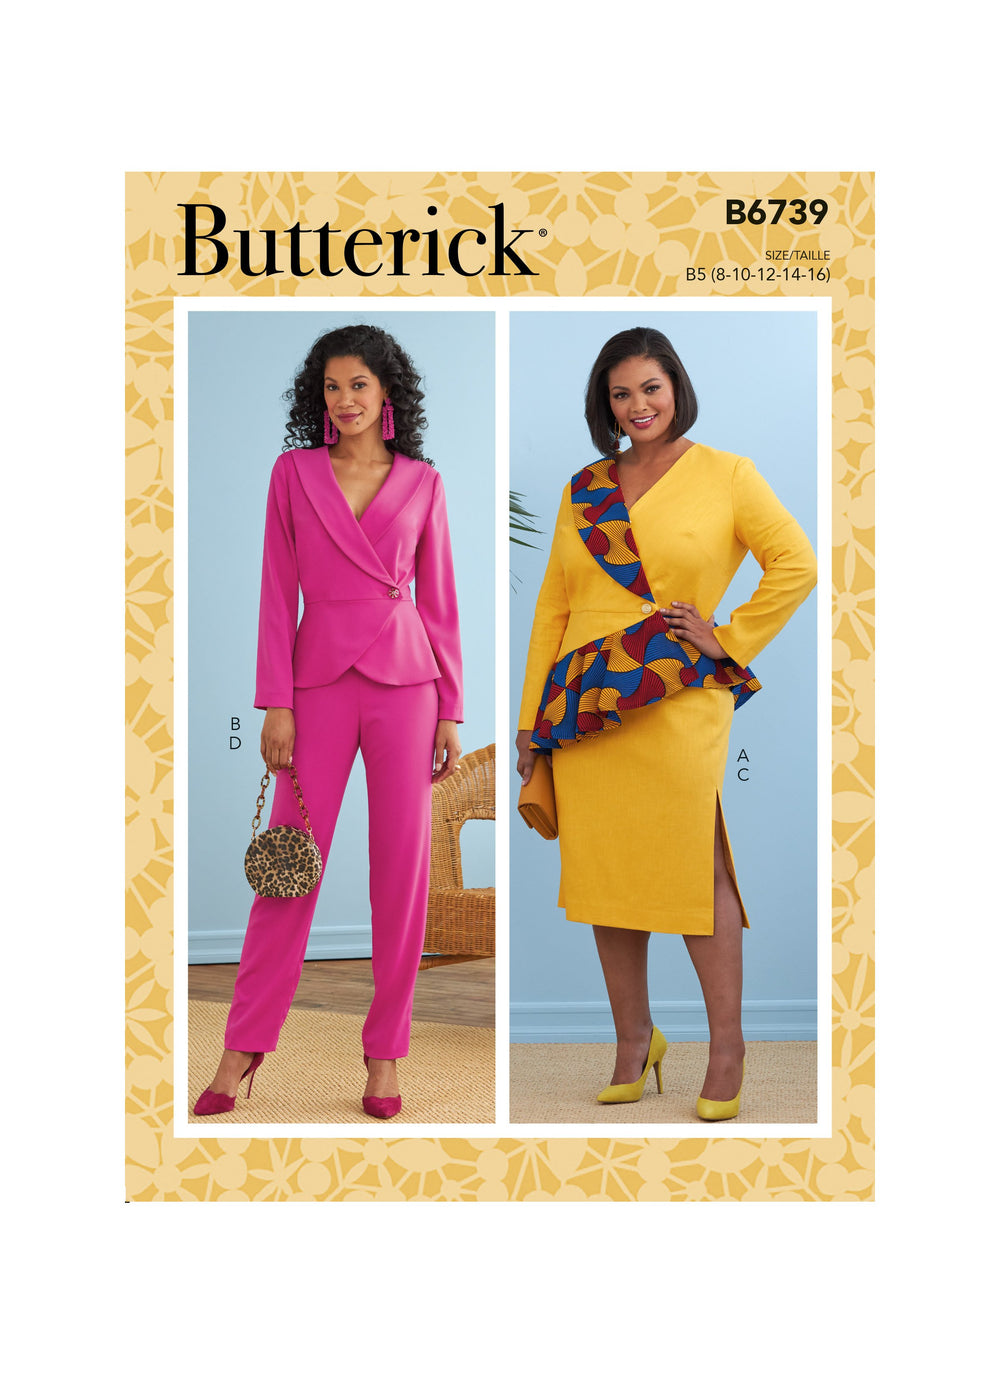 Butterick Sewing Pattern 6739 Jacket, Dress, Top, Skirt and Pants from Jaycotts Sewing Supplies